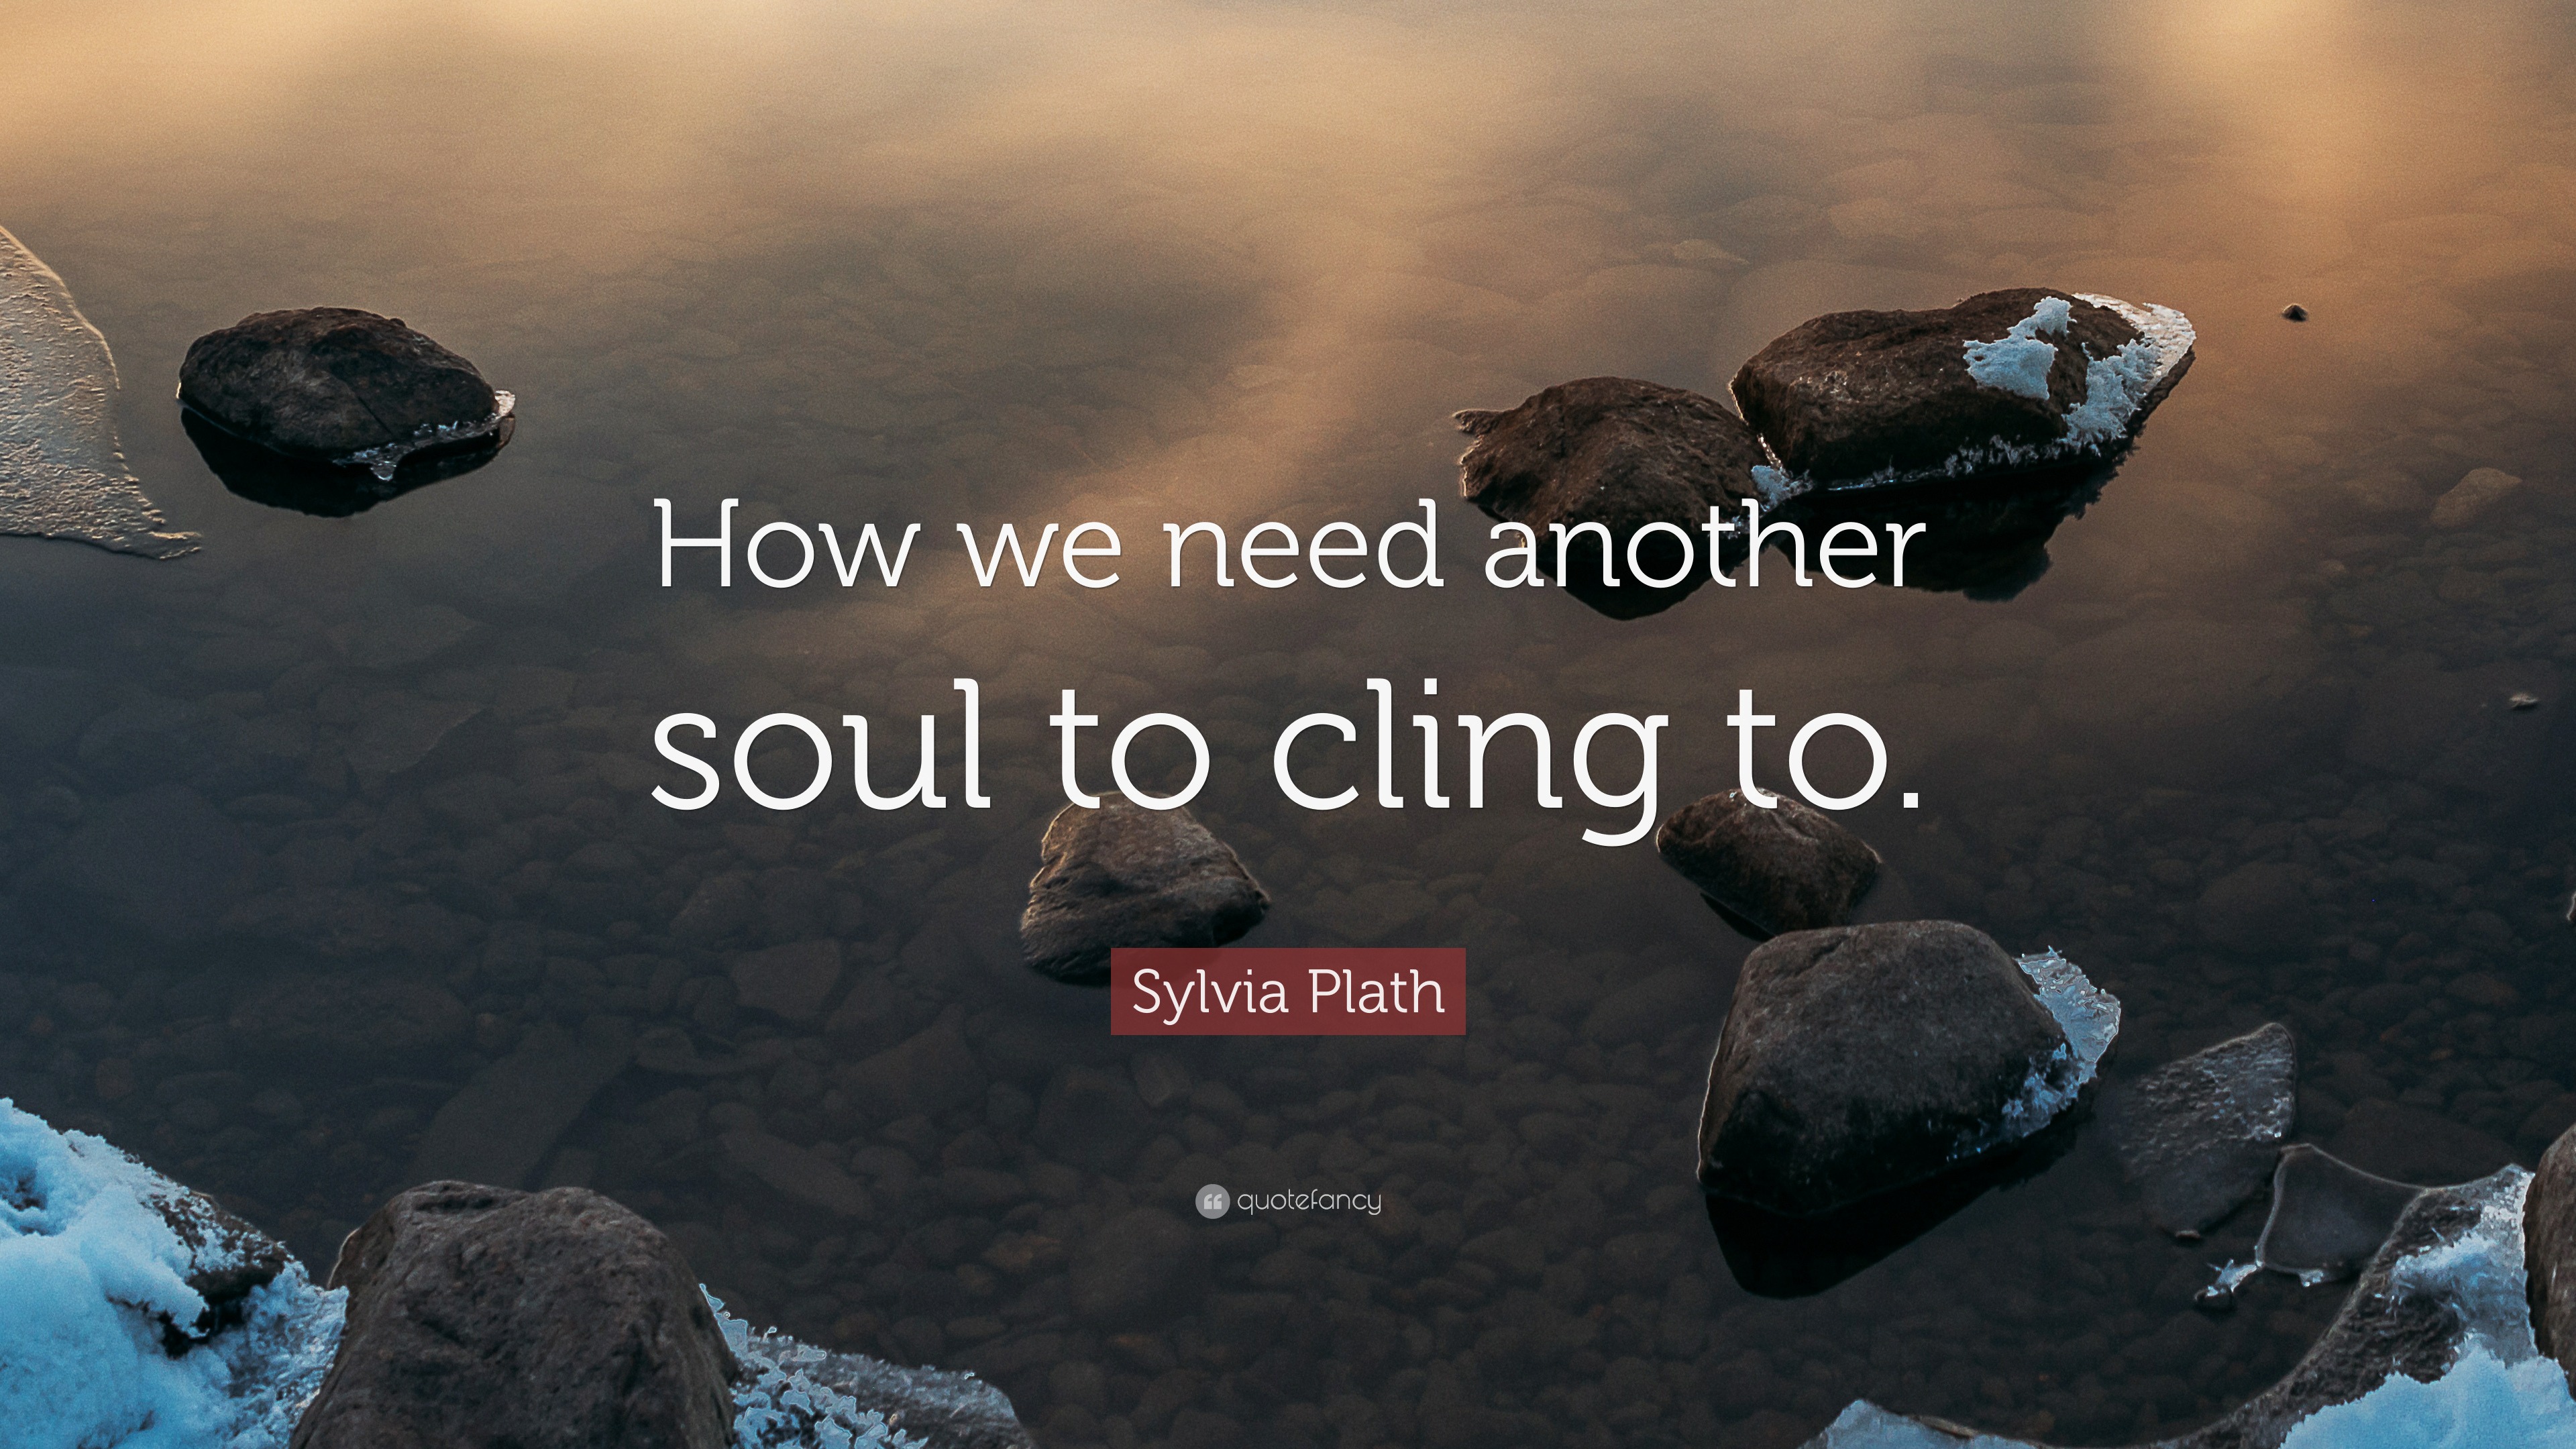 Sylvia Plath Quote: “How we need another soul to cling to.”